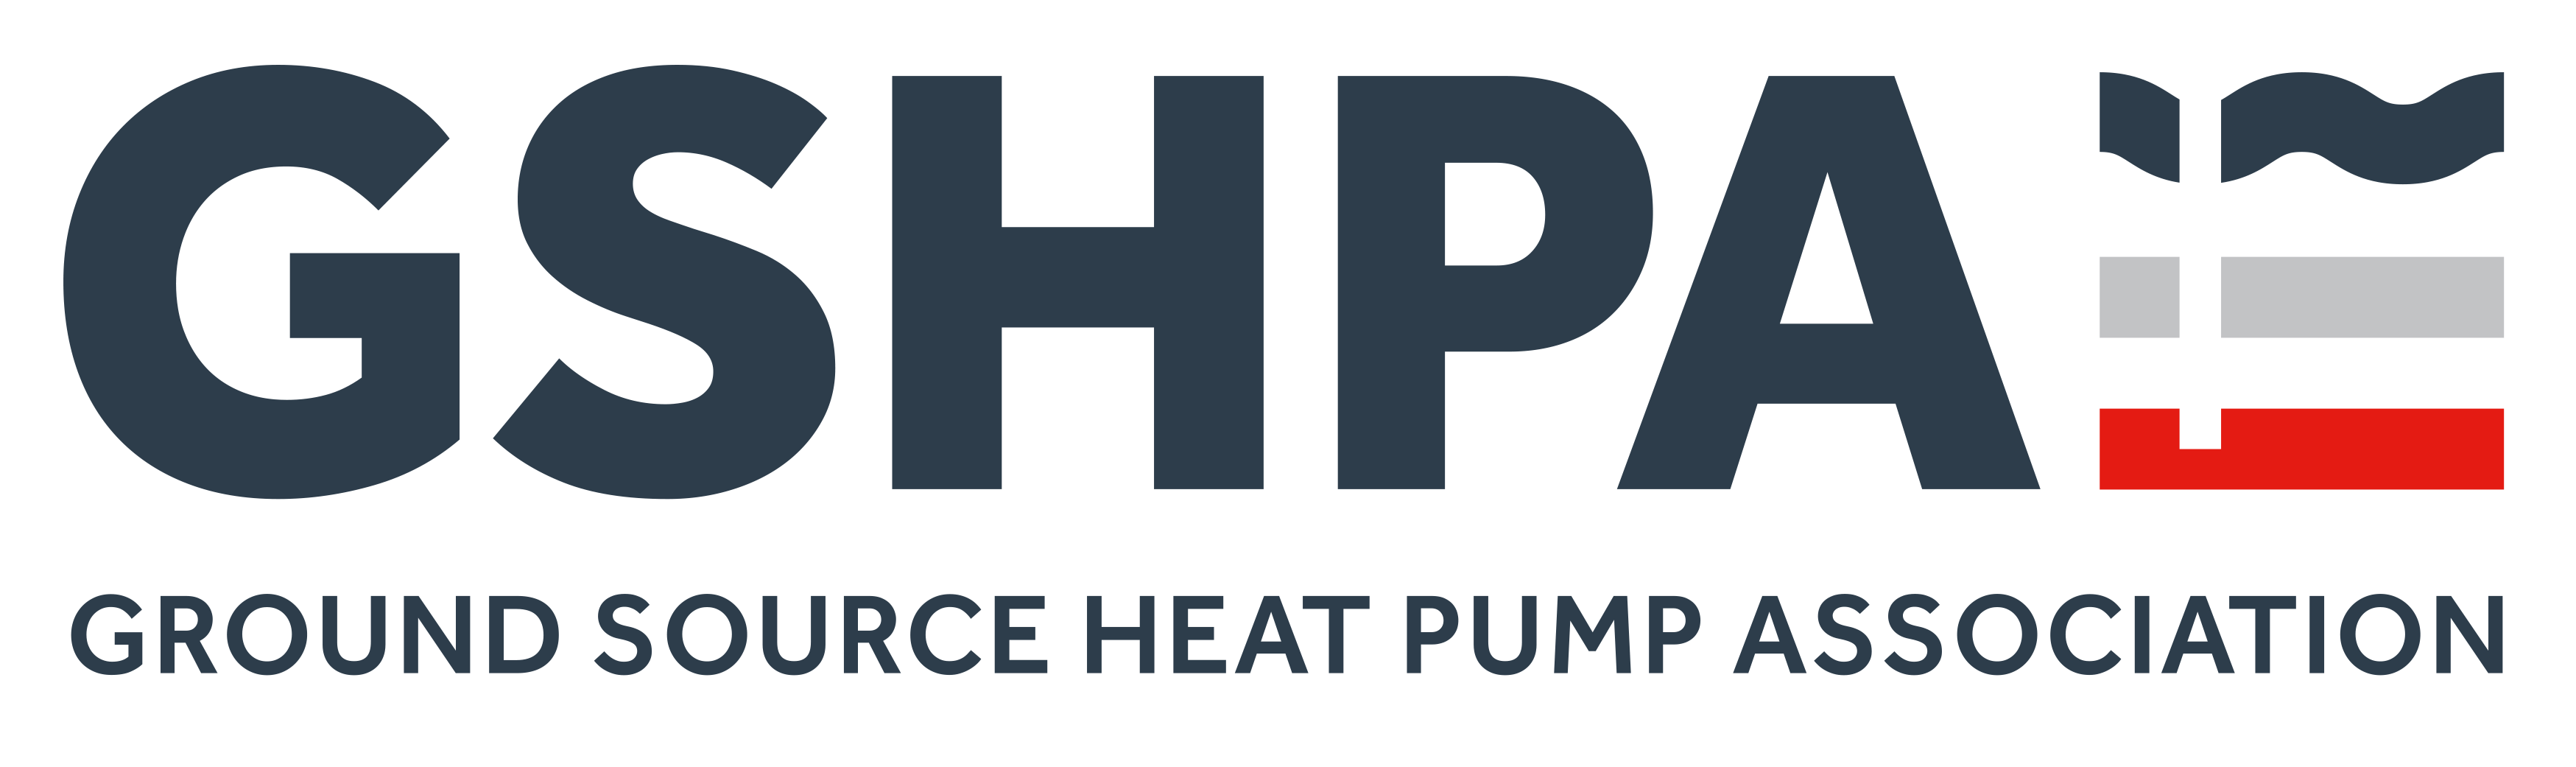 ICAX is a member of the Ground Source Heat Pump Association